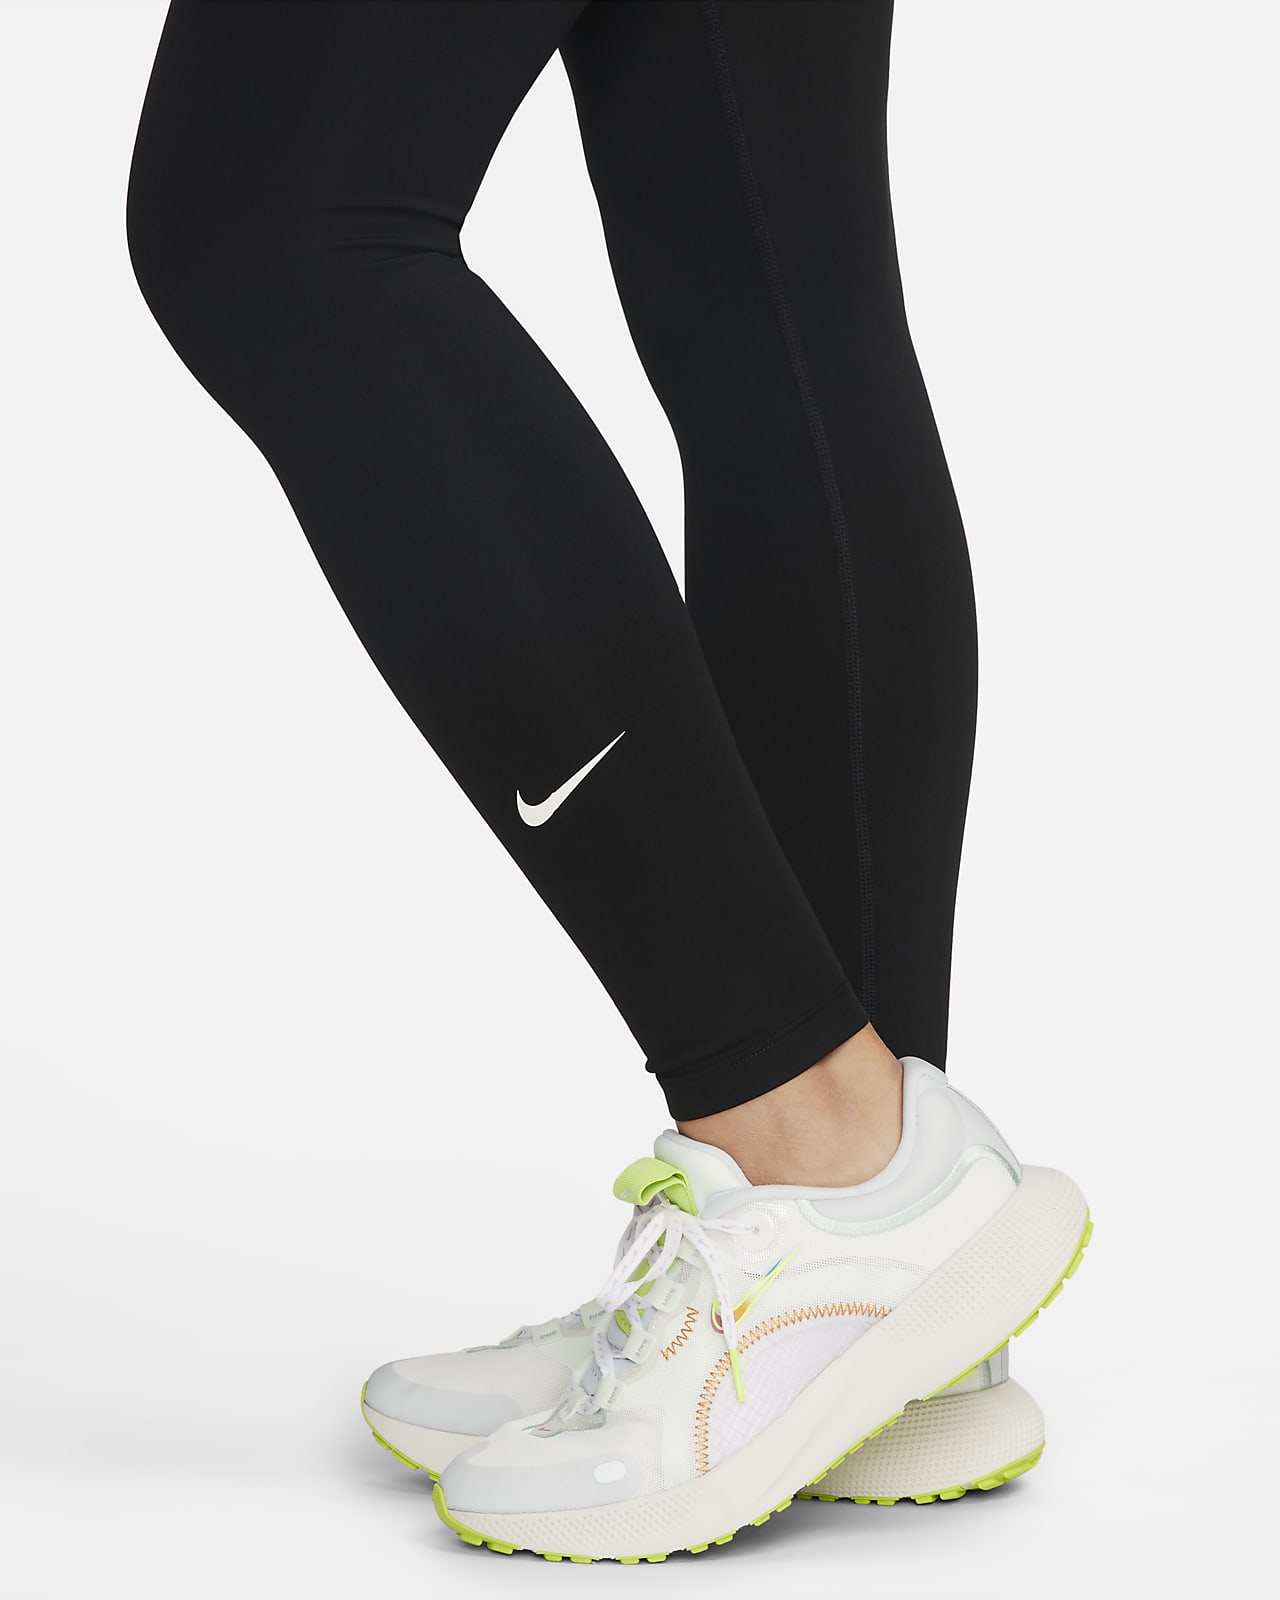 Nike Women's One Maternity Dri-FIT All-Over Print Training Tights -  ShopStyle Activewear Pants